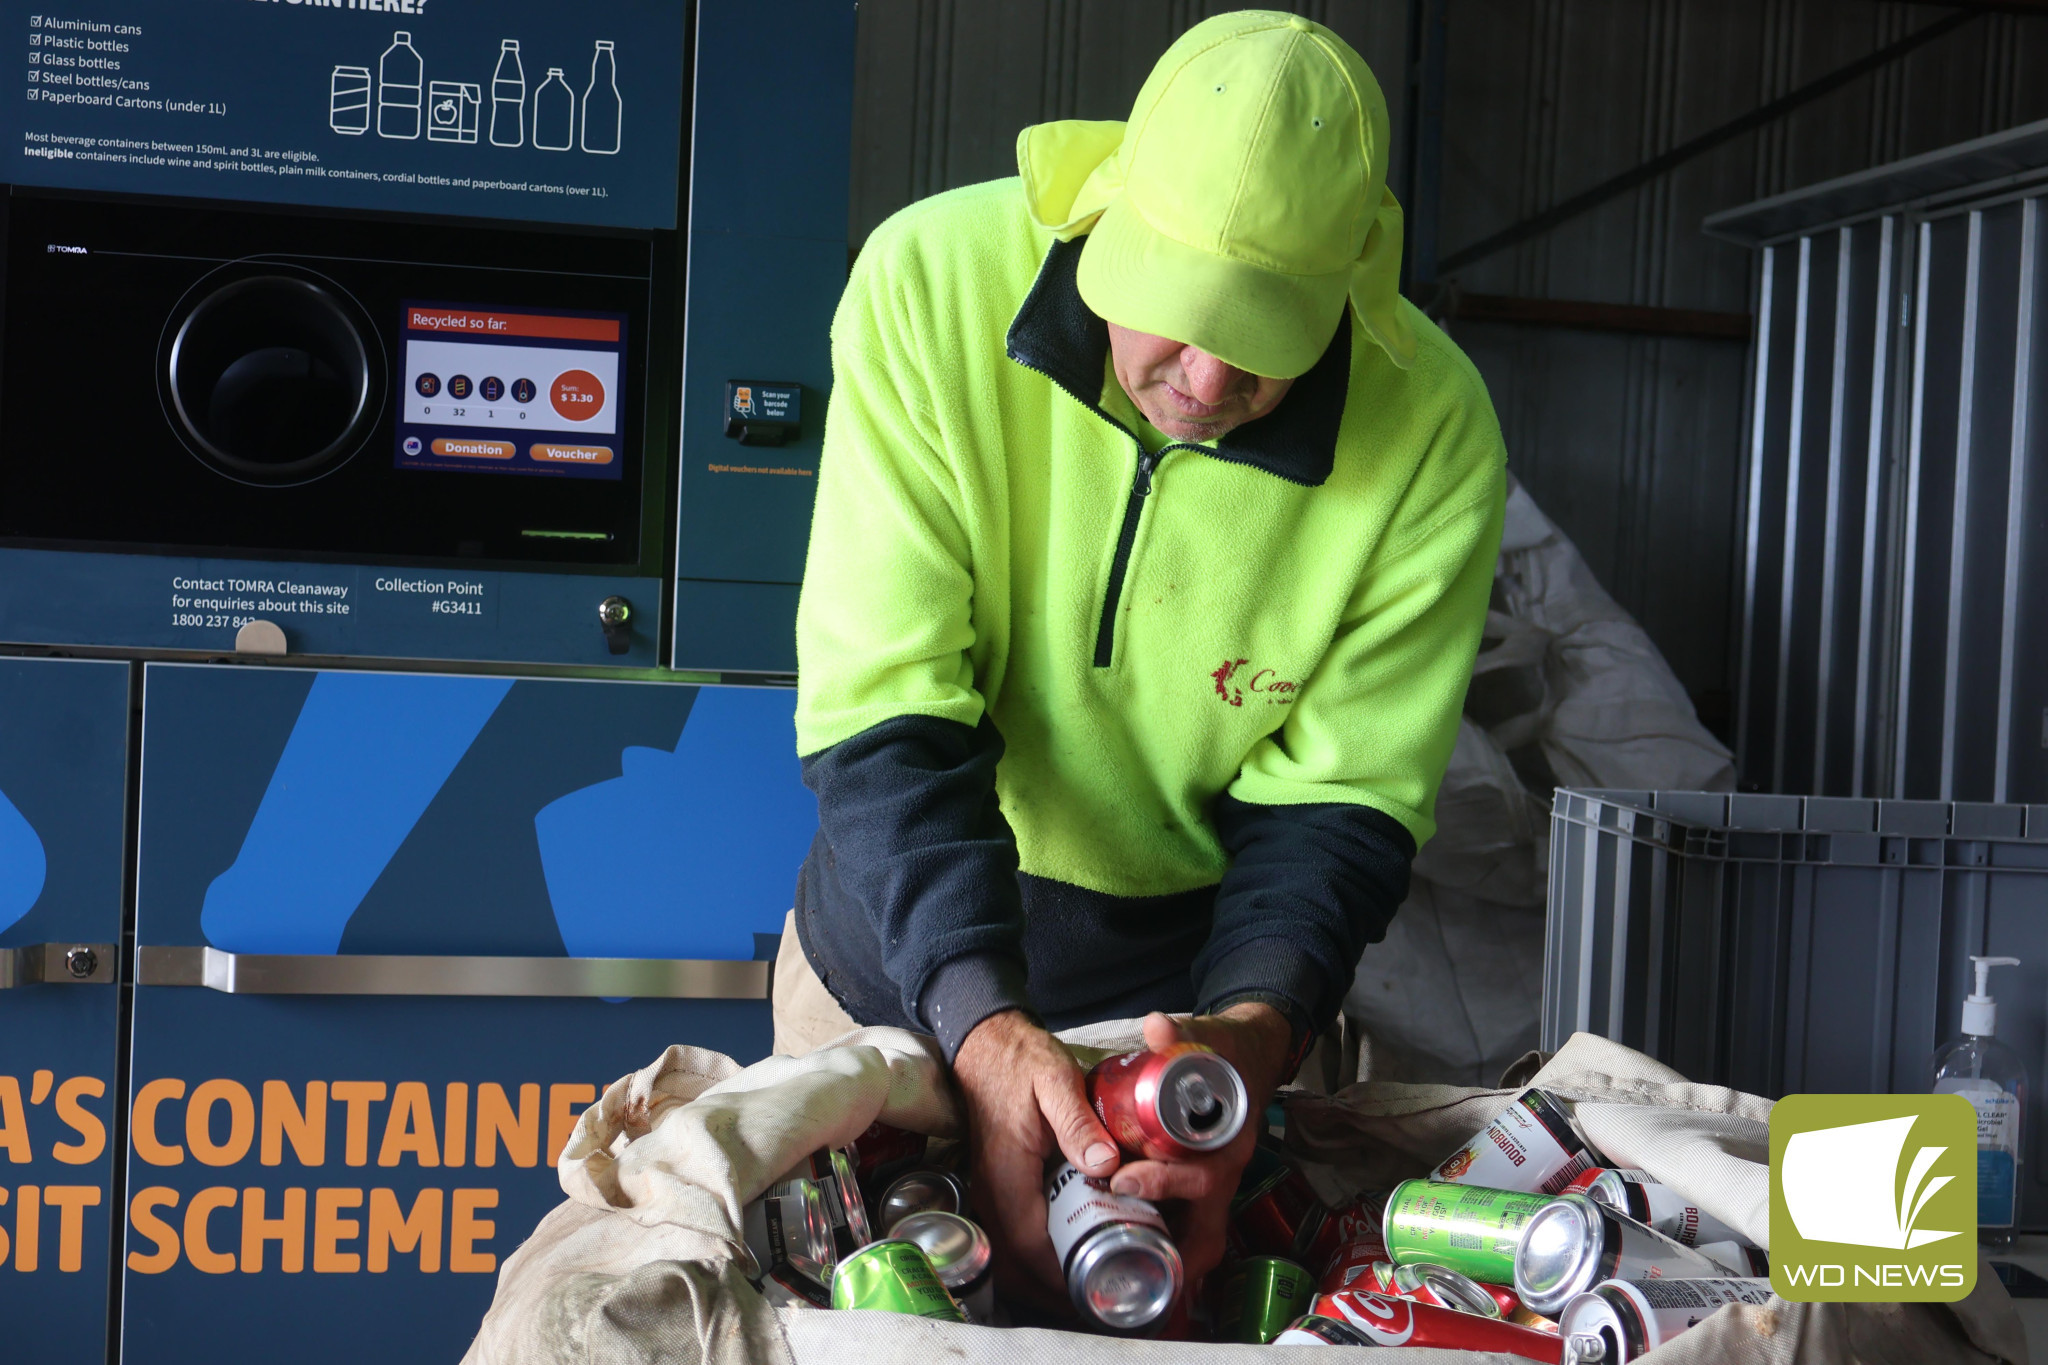 Volume: Brian is among the Cooinda participants who have taken a hands-on approach in helping the launch of the Container Deposit Scheme in Terang grow from strength-to-strength. With over 500,000 containers now recycled in the town, Brian shows no signs of slowing down any time soon.